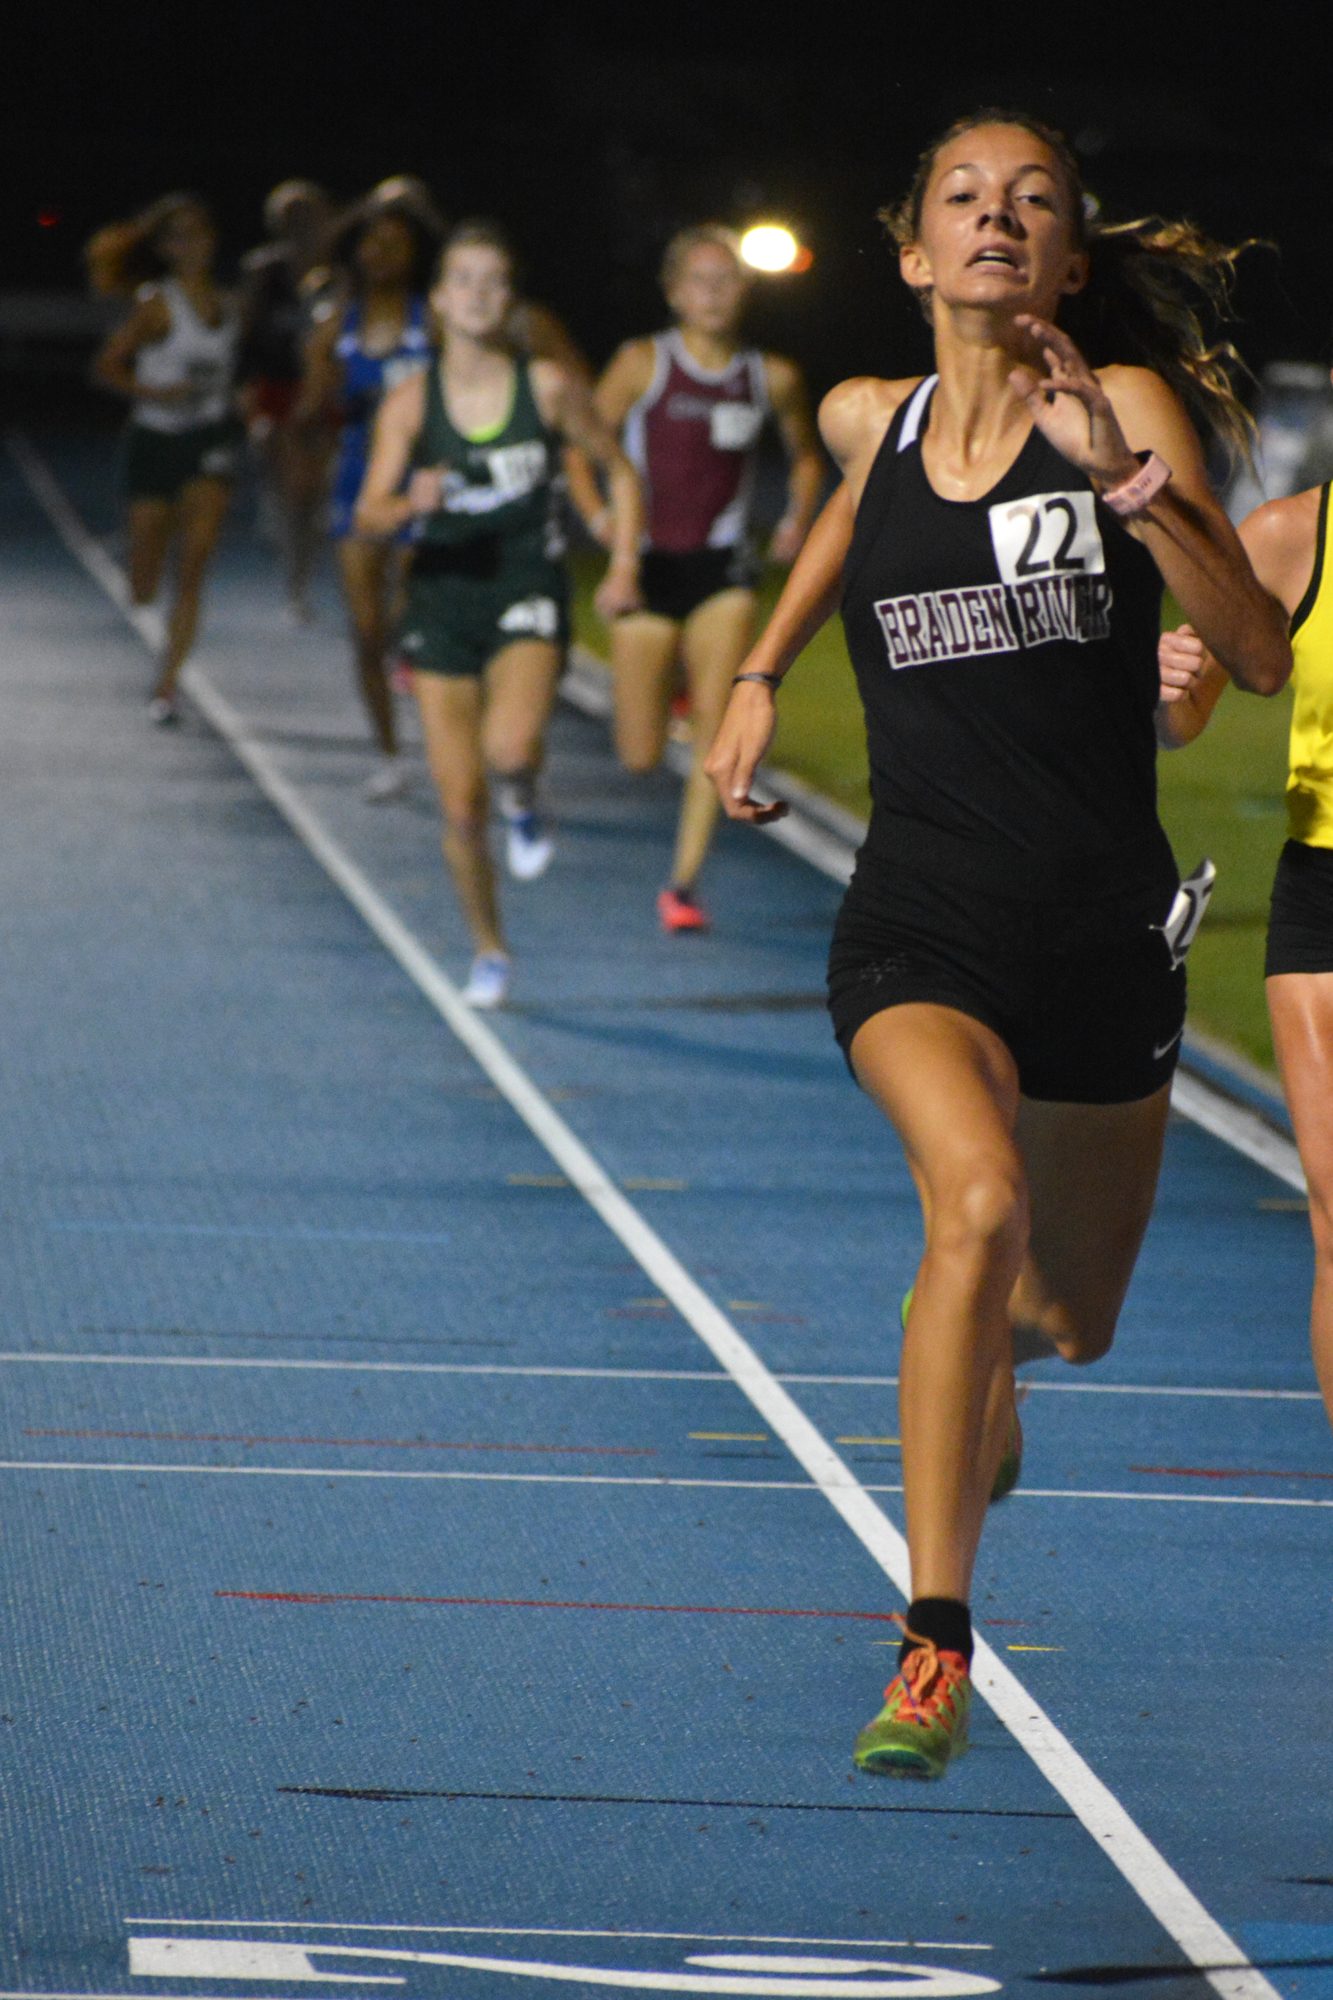 Grace Marston made the state track and field tournament at Braden River High. Now she's at Lakewood Ranch High.